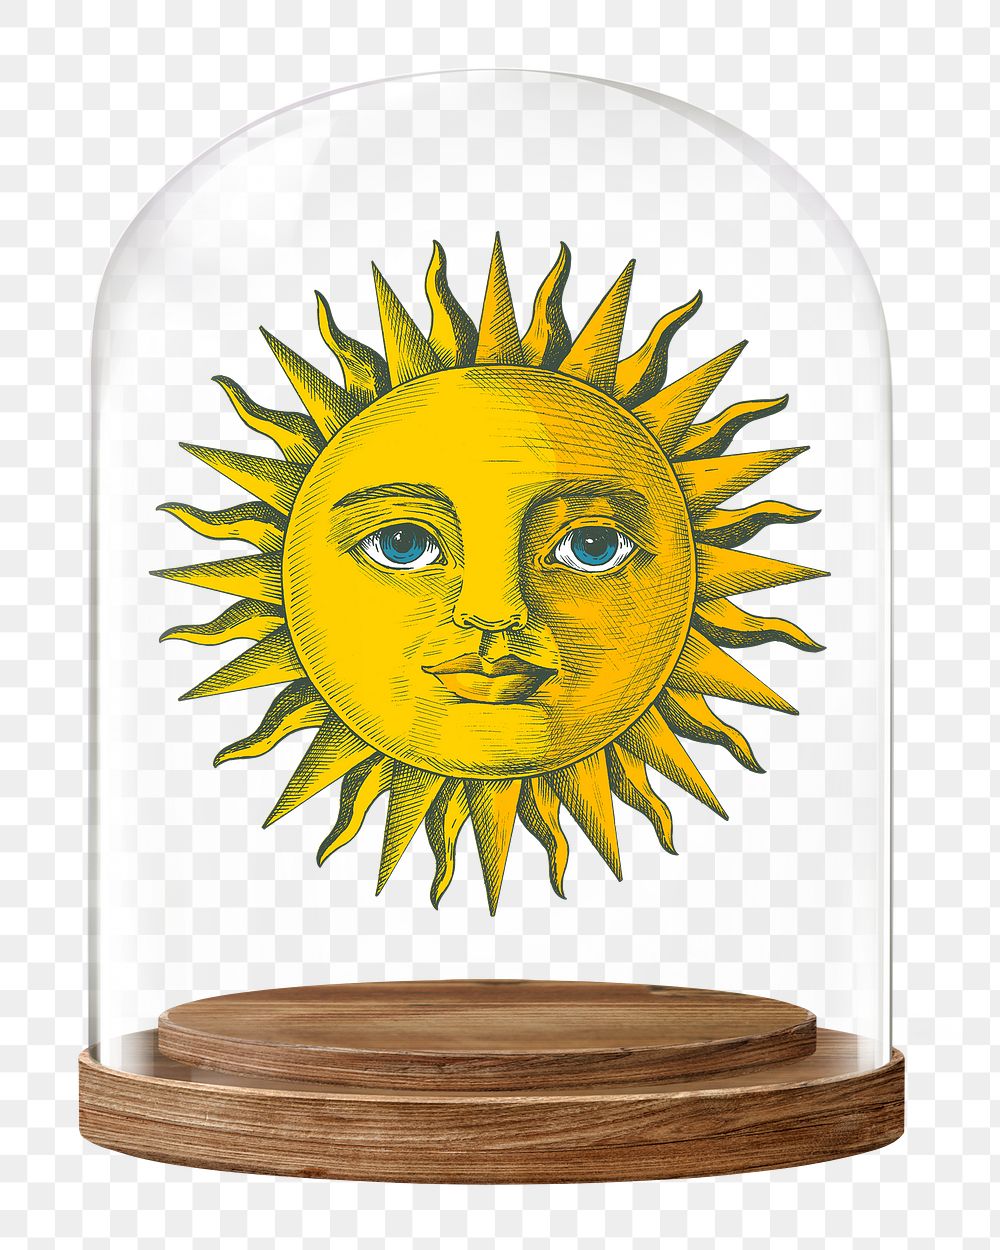 Celestial sun png glass dome sticker, whimsical concept art, transparent background